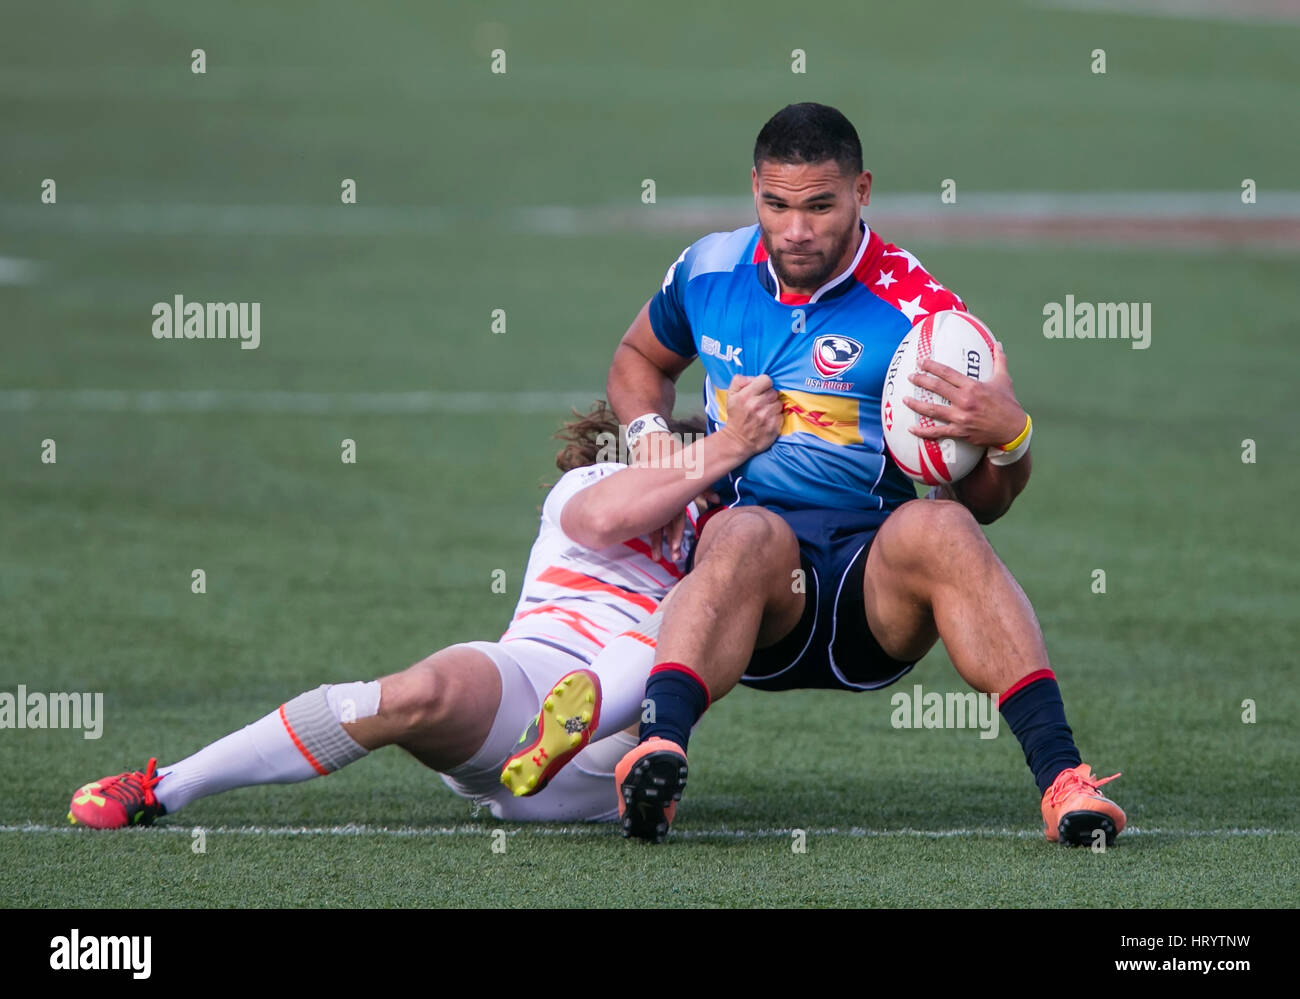 Las Vegas, NV, USA. 4th Mar, 2017. Martin Iosefo #12 of USA in action during Pool B play of the rugby sevens match between the USA and England at Sam Boyd Stadium in Las Vegas, Nv. England defeated the US 24-17. Damon Tarver/Cal Sport Media/Alamy Live News Stock Photo